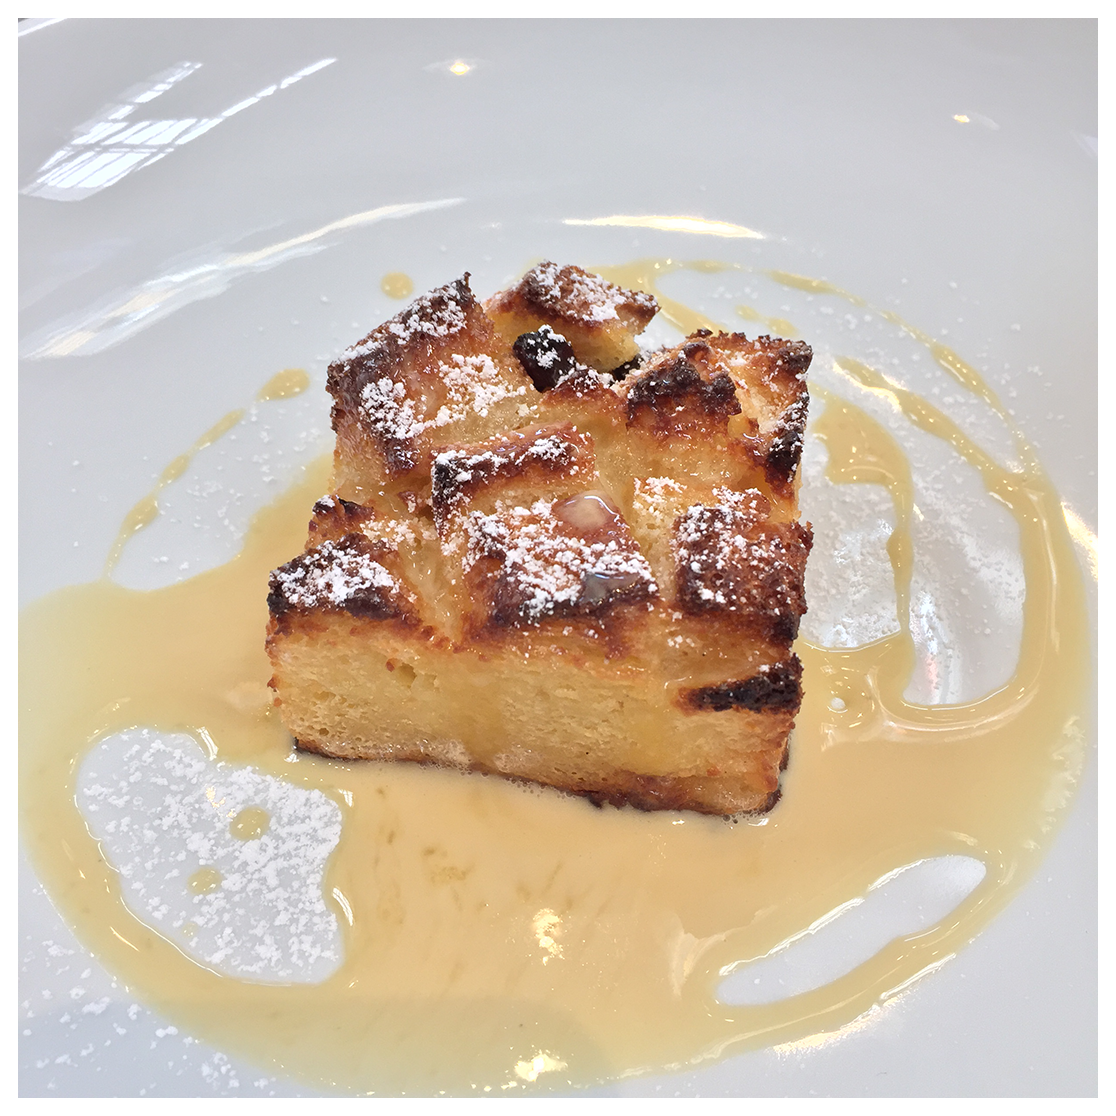 Candy Cap Bread Pudding with Maple Creme Anglaise